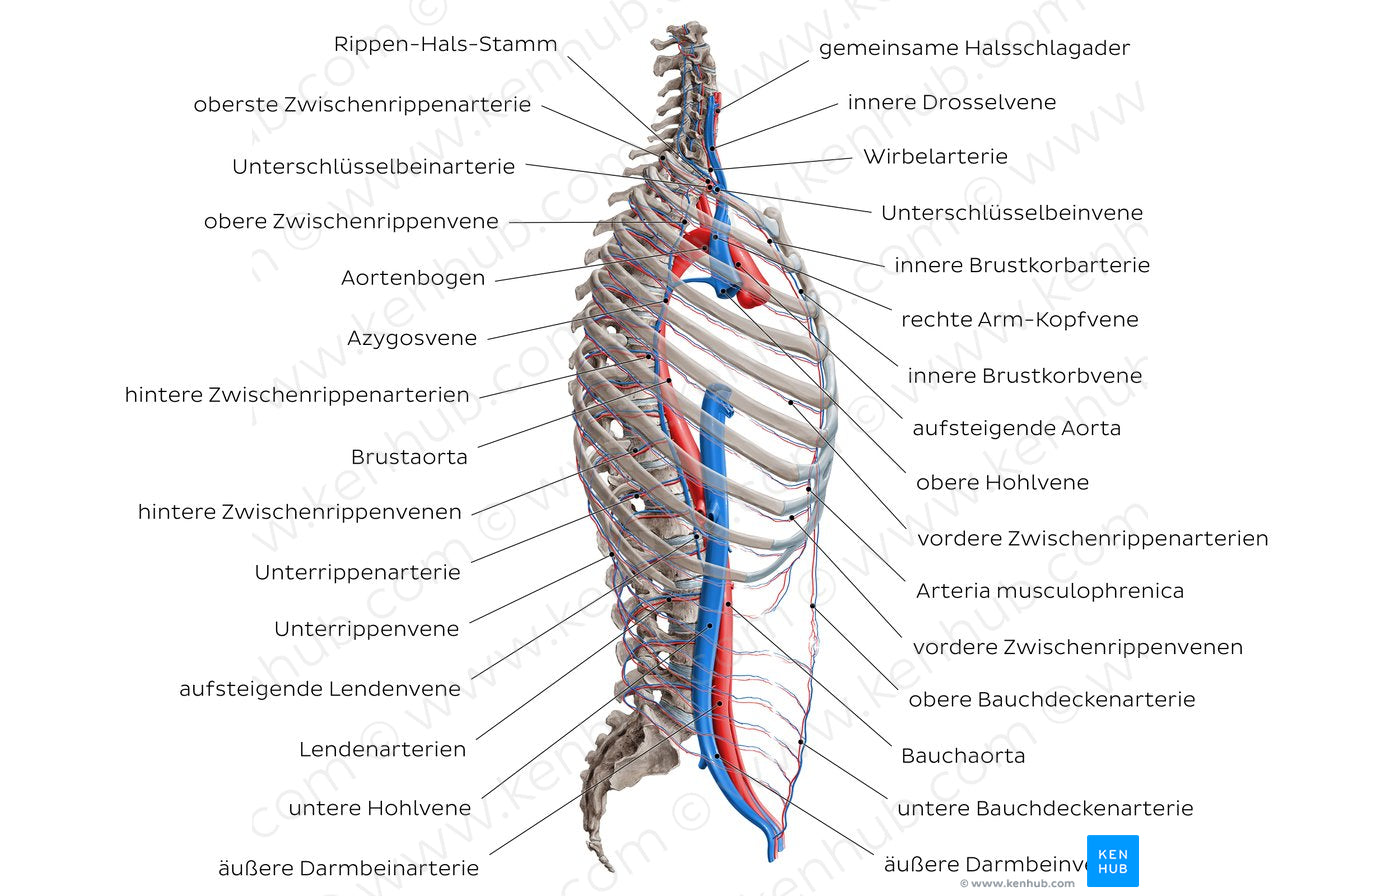 Arteries and veins of the back: Lateral view (German)